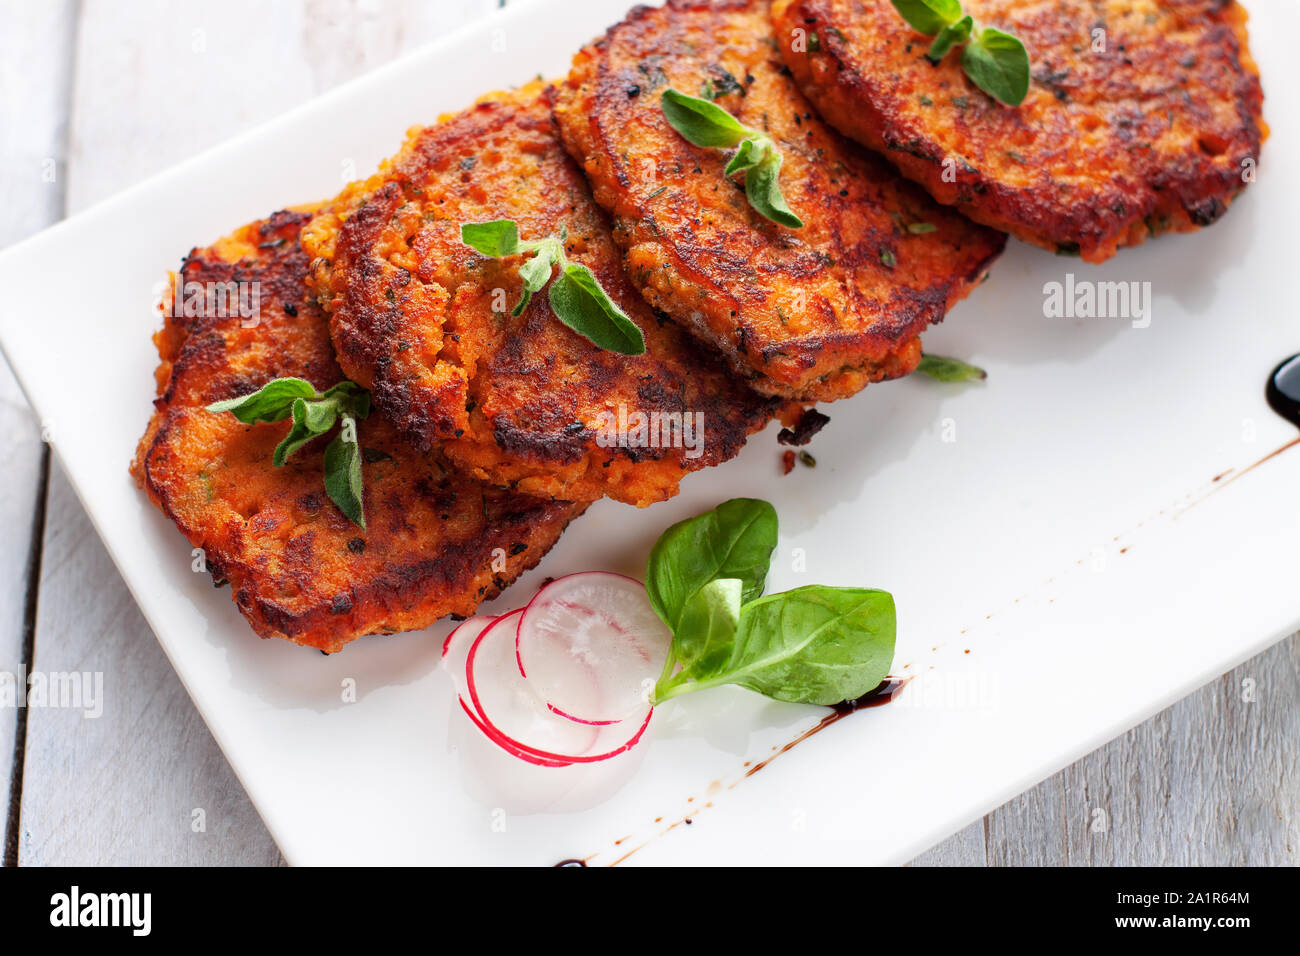 Homemade fried fish patties from canned salmon, sweet potato, eggs and chopped parsley Stock Photo